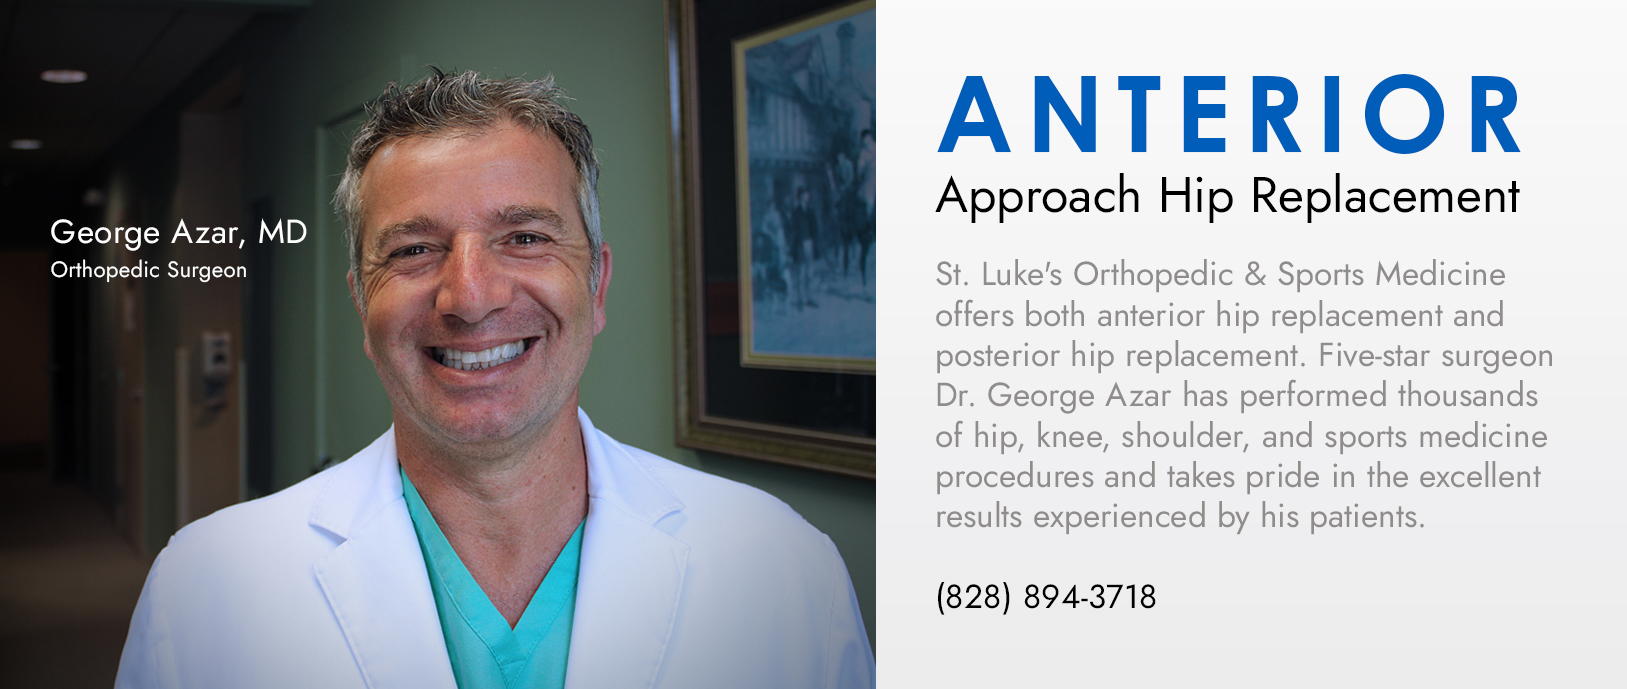 Banner picture of Dr. George Azar smiling. Banner says:
Bringing world-class ORTHOPEDICS to rural Polk County.

Total Joint Replacement, Shoulder Care, Sports Medicine
Scheduling appointments now
Seeing patients beginning June, 2022

(828) 894-3718

St. Luke's
ORTHOPEDICS